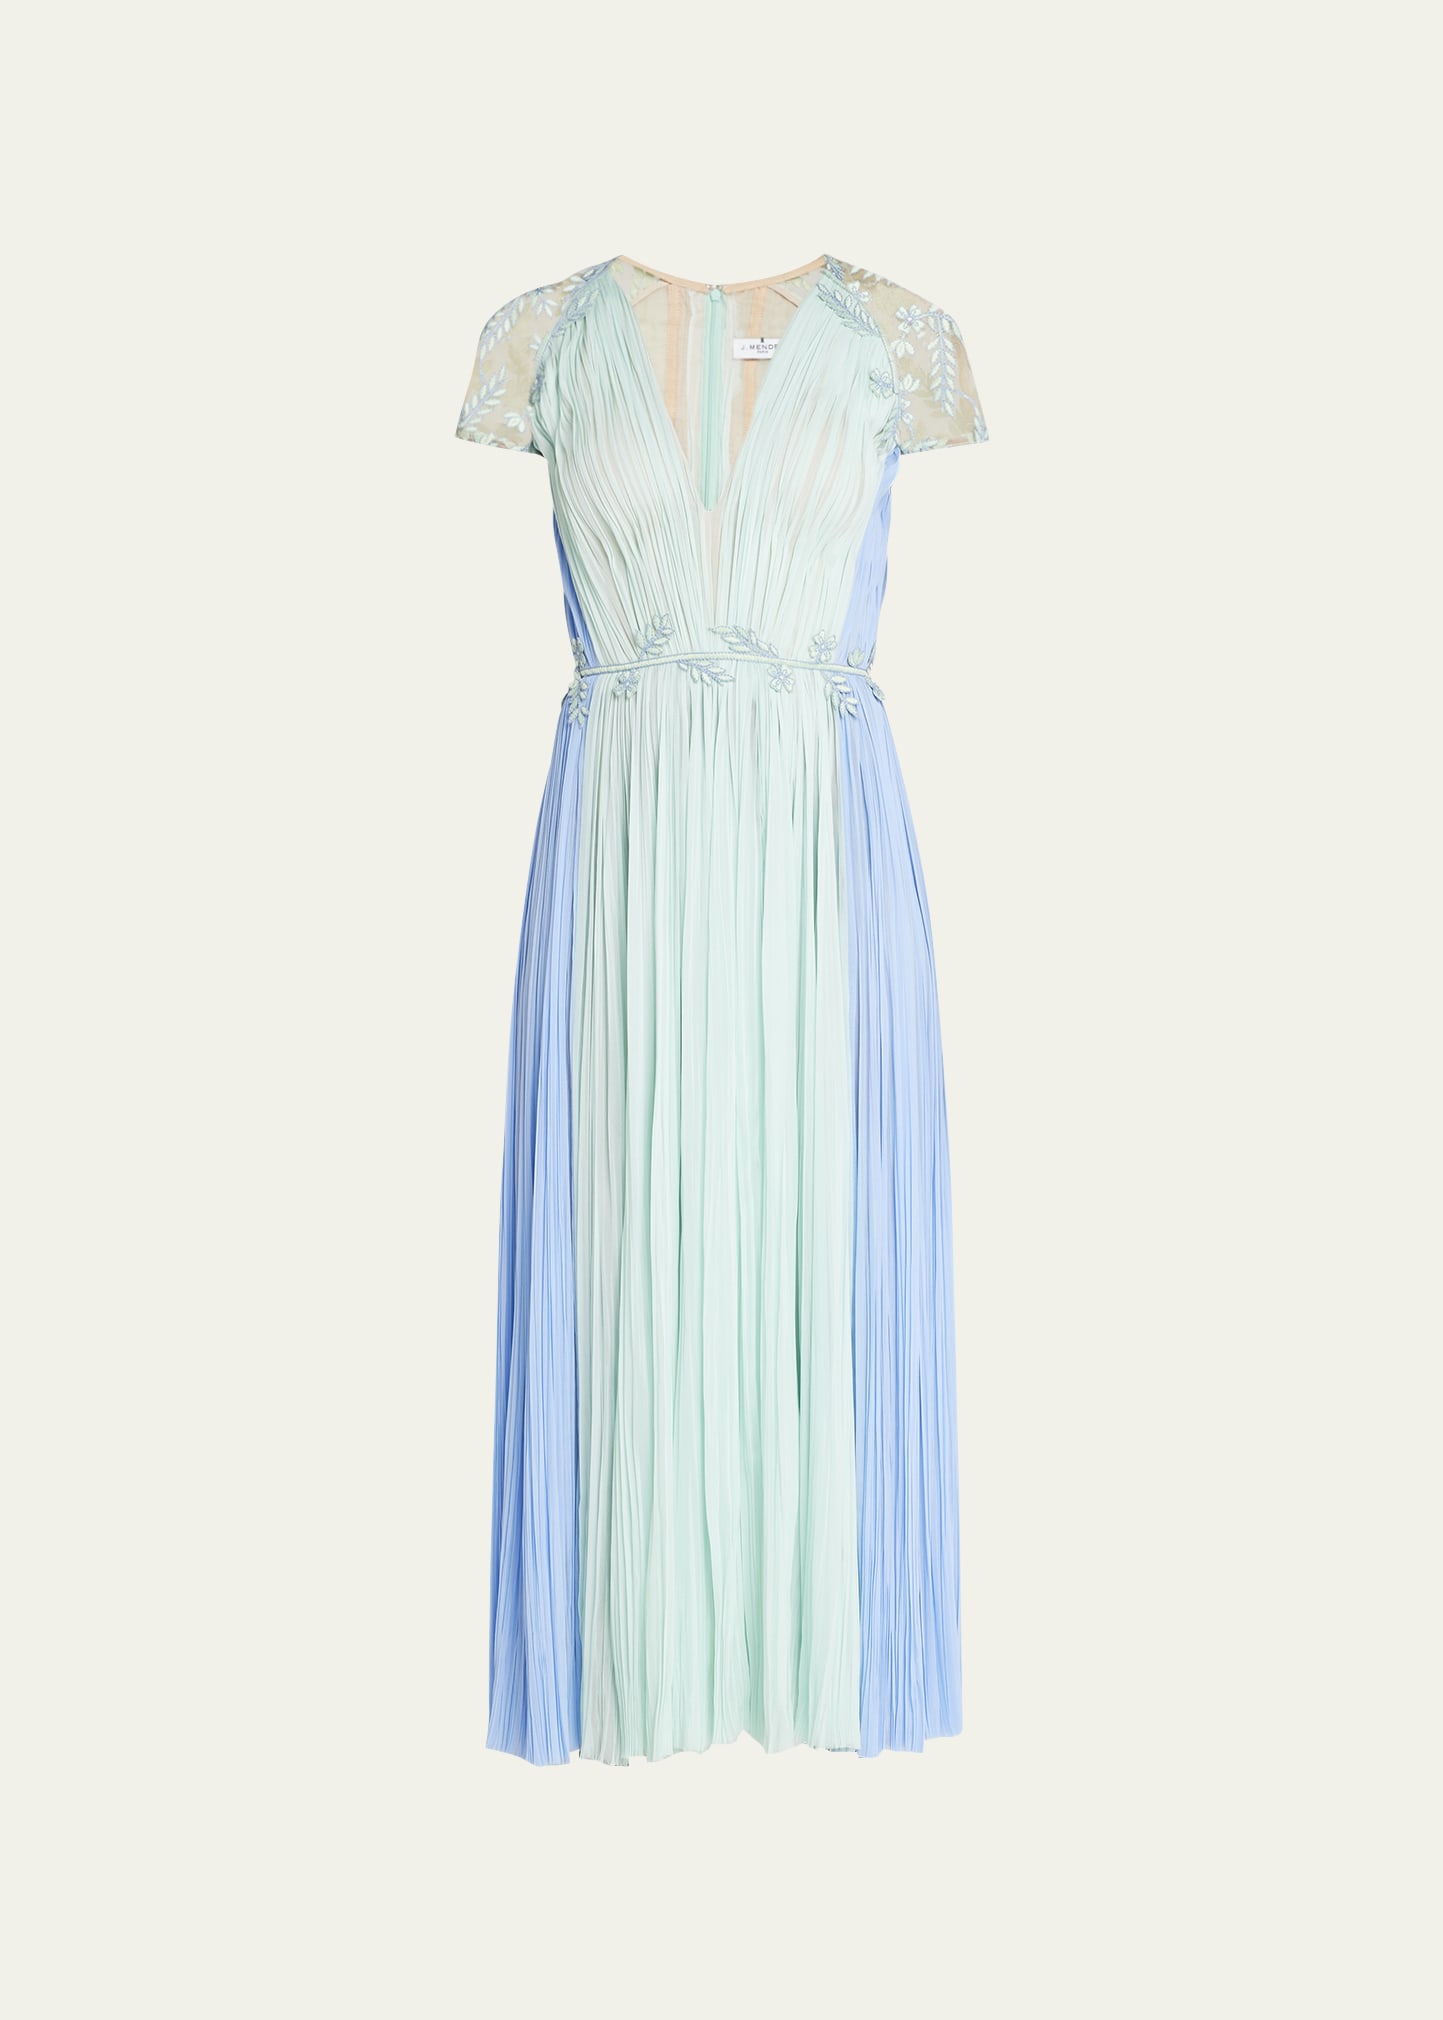 J. Mendel Two-Toned Silk Hand-Pleated Dress with Floral Applique